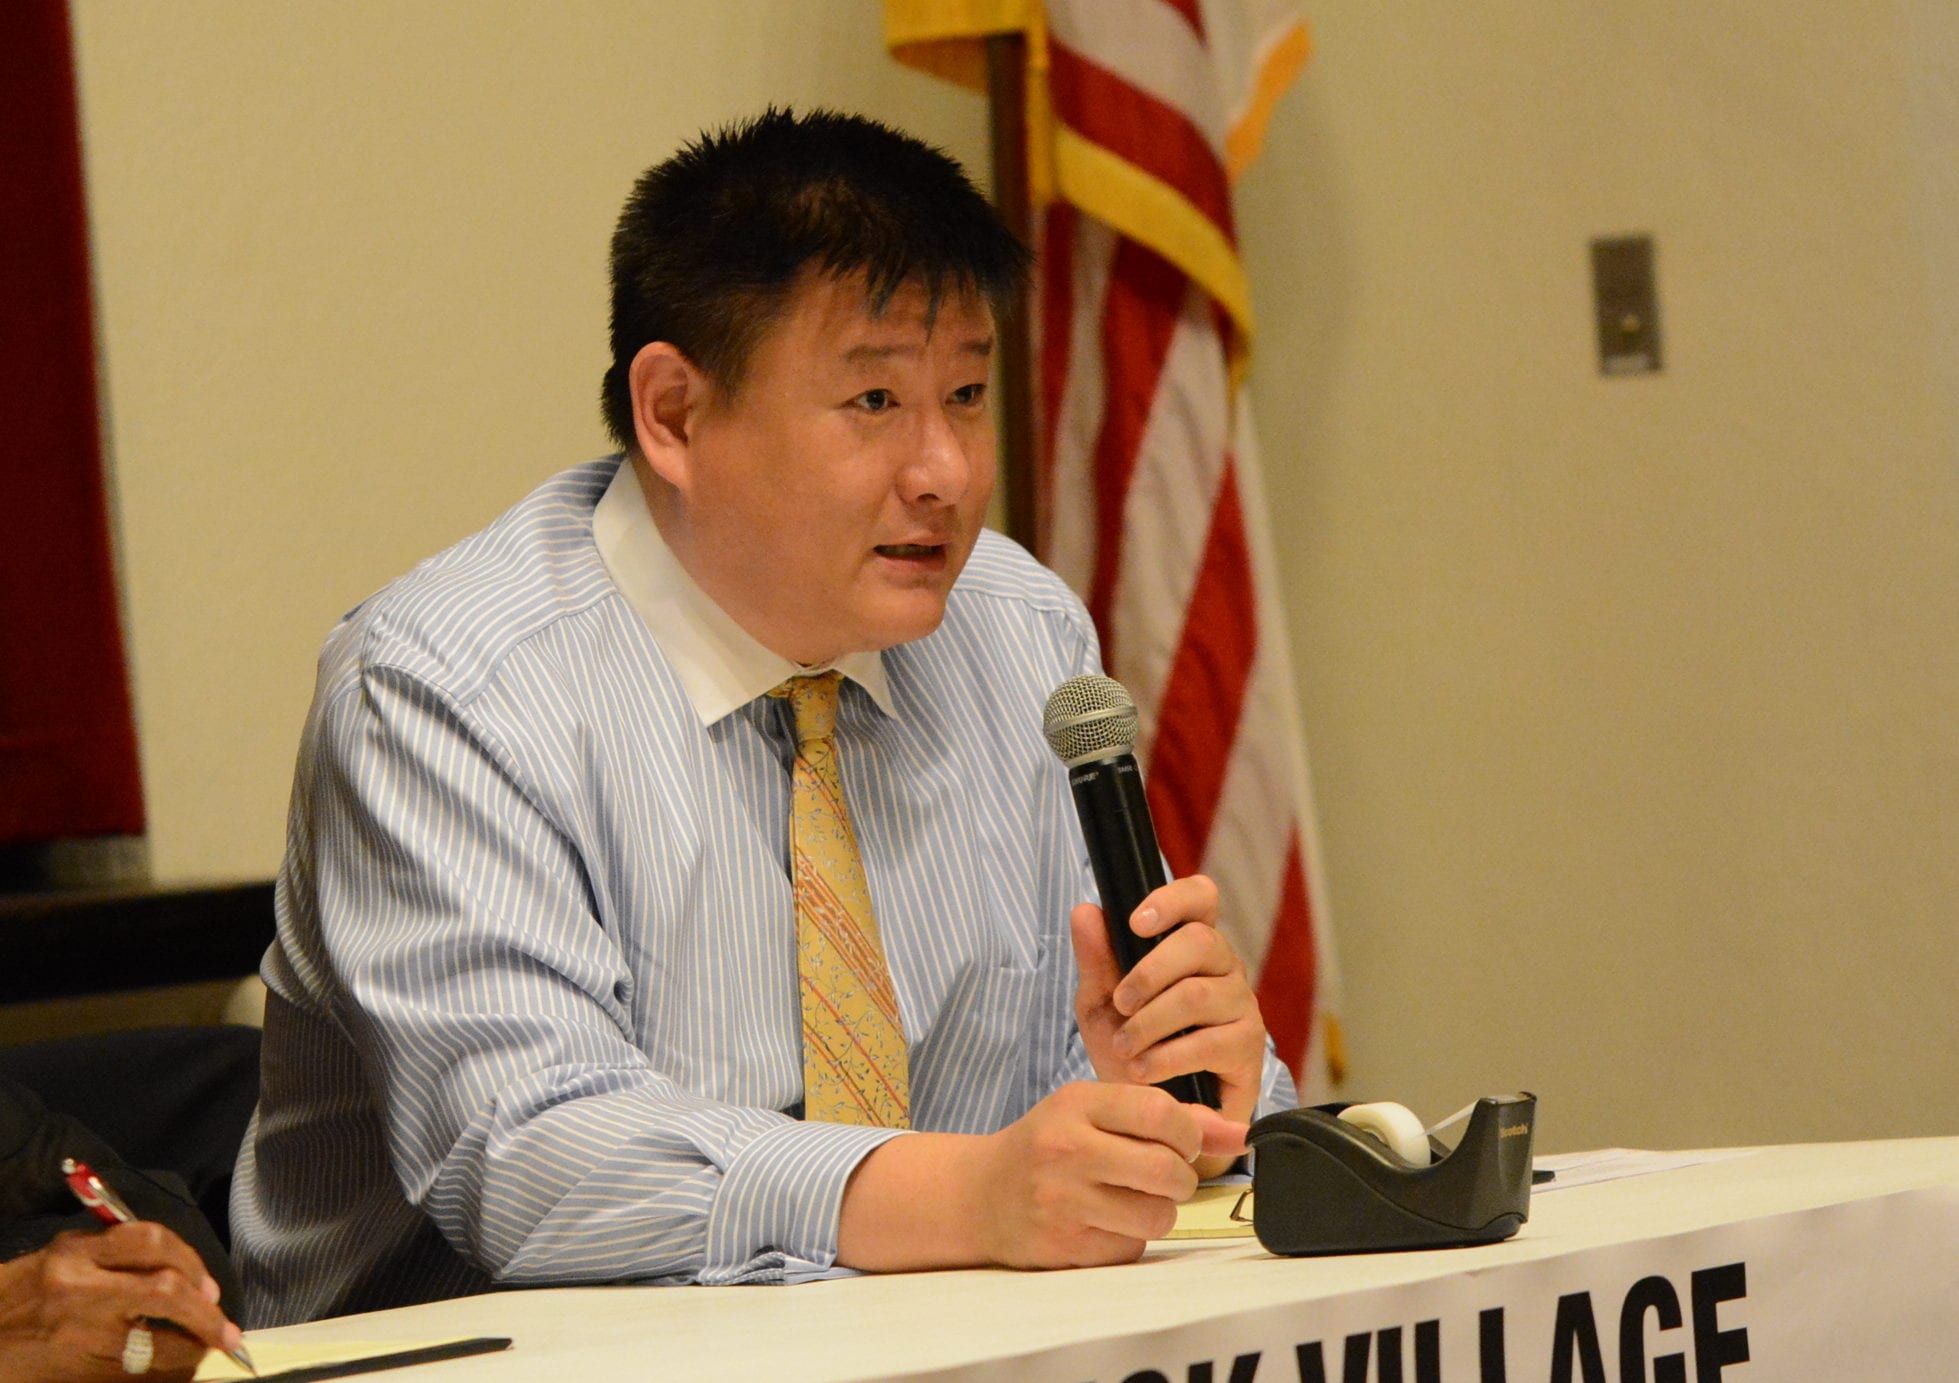 James Wu, who is running for mayor in Great Neck Village, sat down with Blank Slate Media. (Photo by Janelle Clausen)